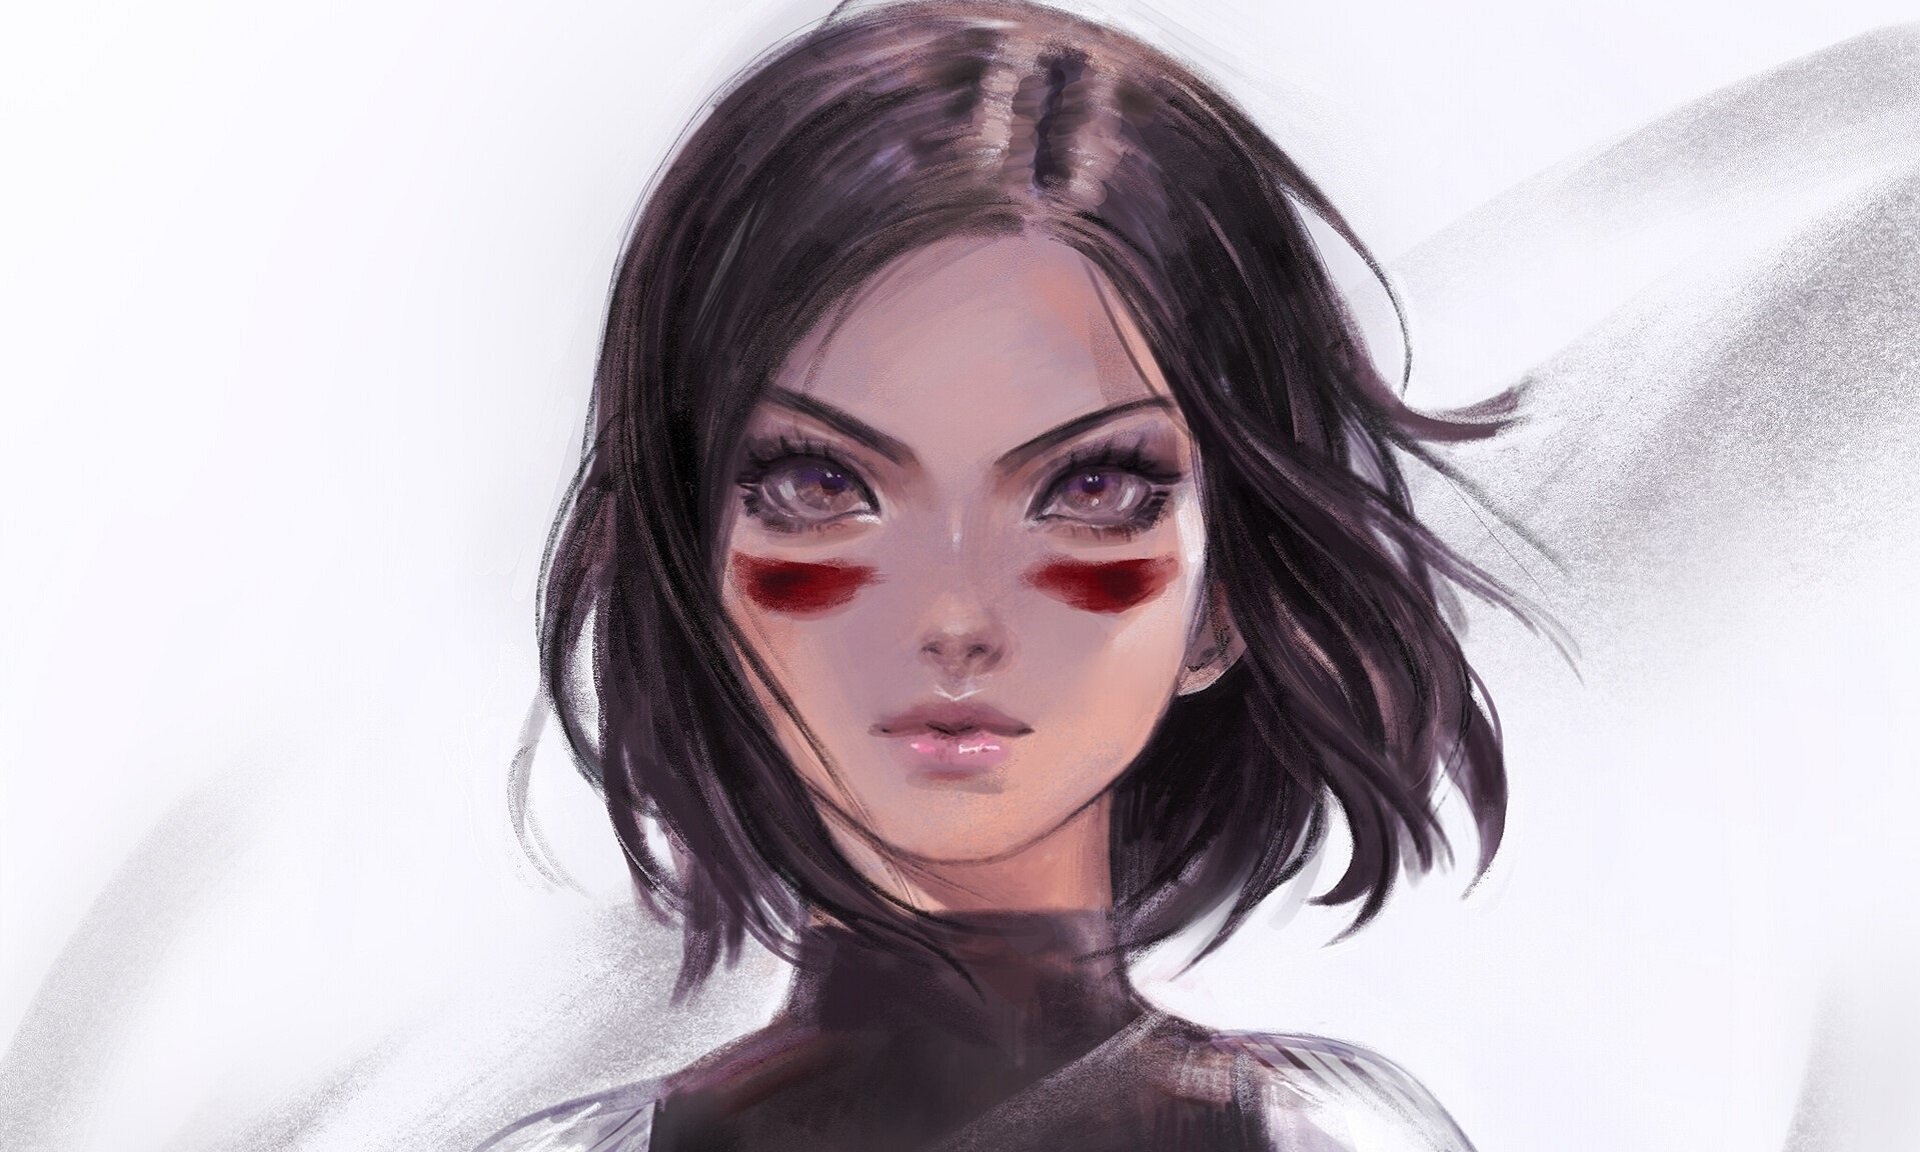 Battle Angel Alita Posters for Sale  Redbubble